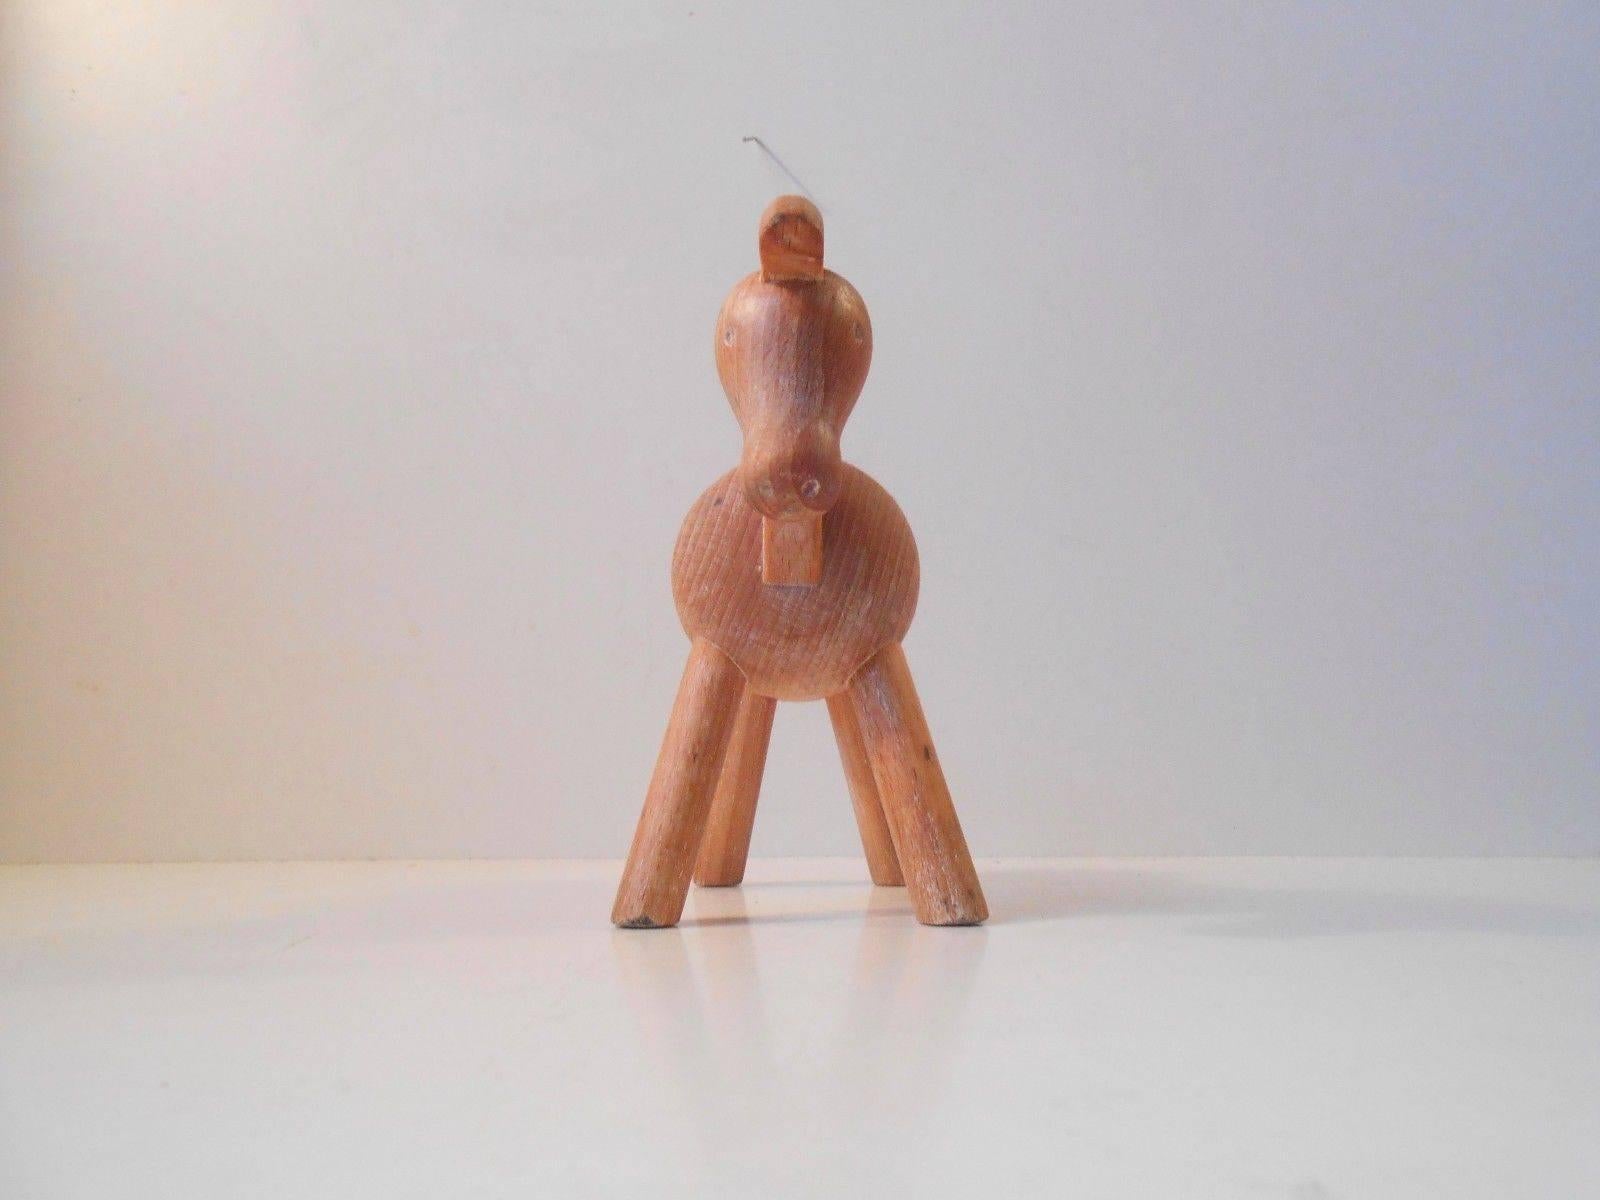 Measurement and info:

Type: Wooden horse toy/figure.

Material: Beech.

Color: Beech with natural patina and aging.

Design/maker: Kay Bojesen.

Origin: Denmark.

Period: 1950s (1935).

Measures:
Height: Approximately 14 cm (5.6